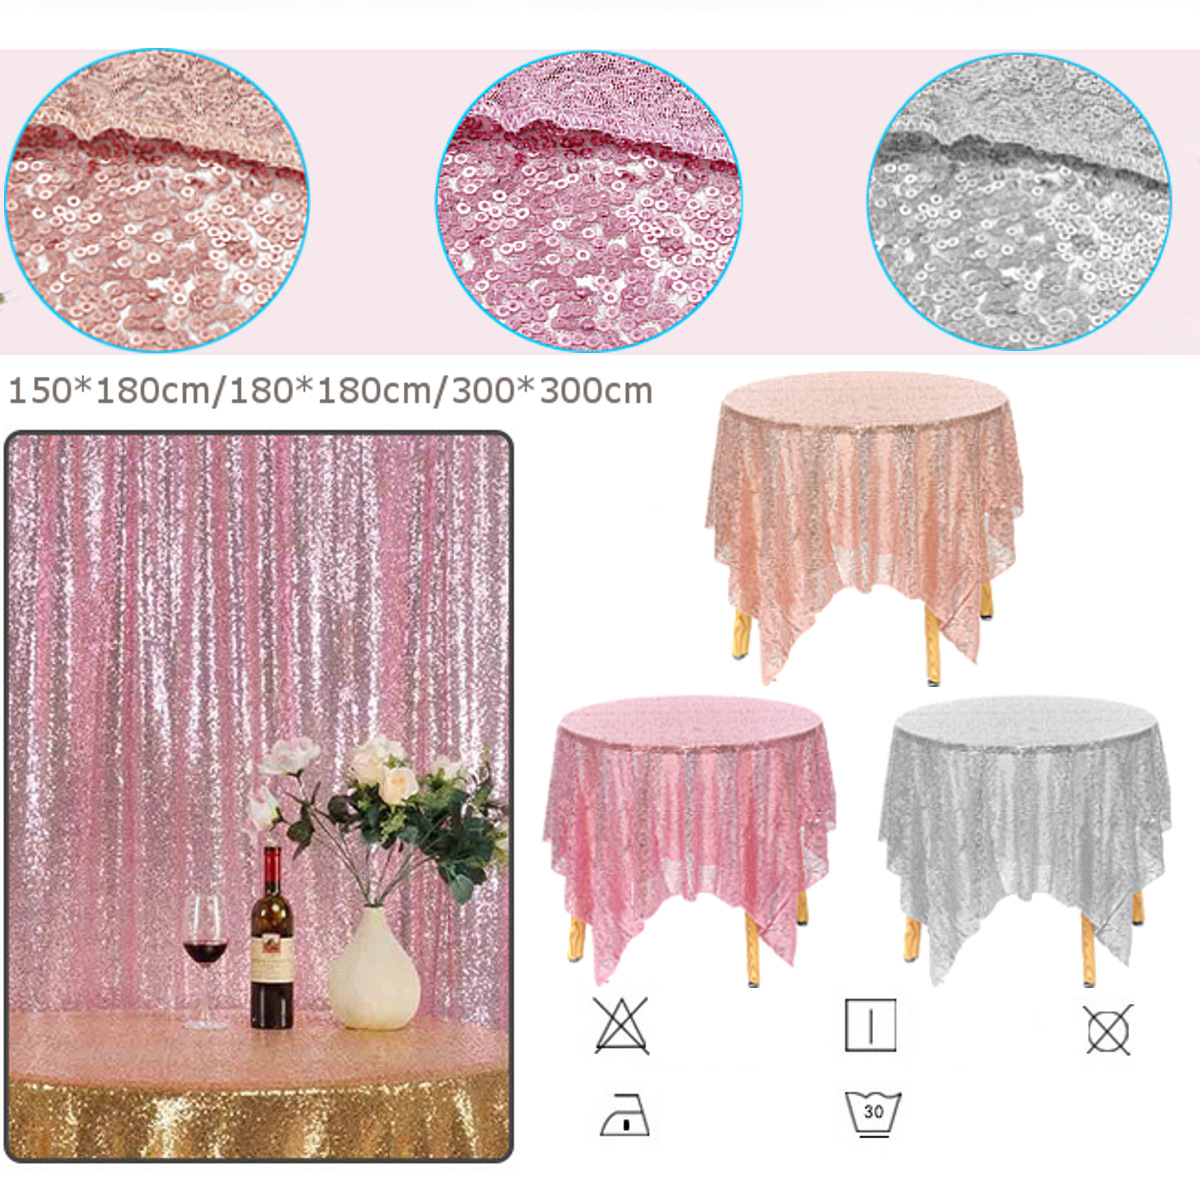 Sequin-Fabric-Wedding-Party-Table-Covers-Photography-Backdrop-Curtains-Table-Cloth-1636379-2